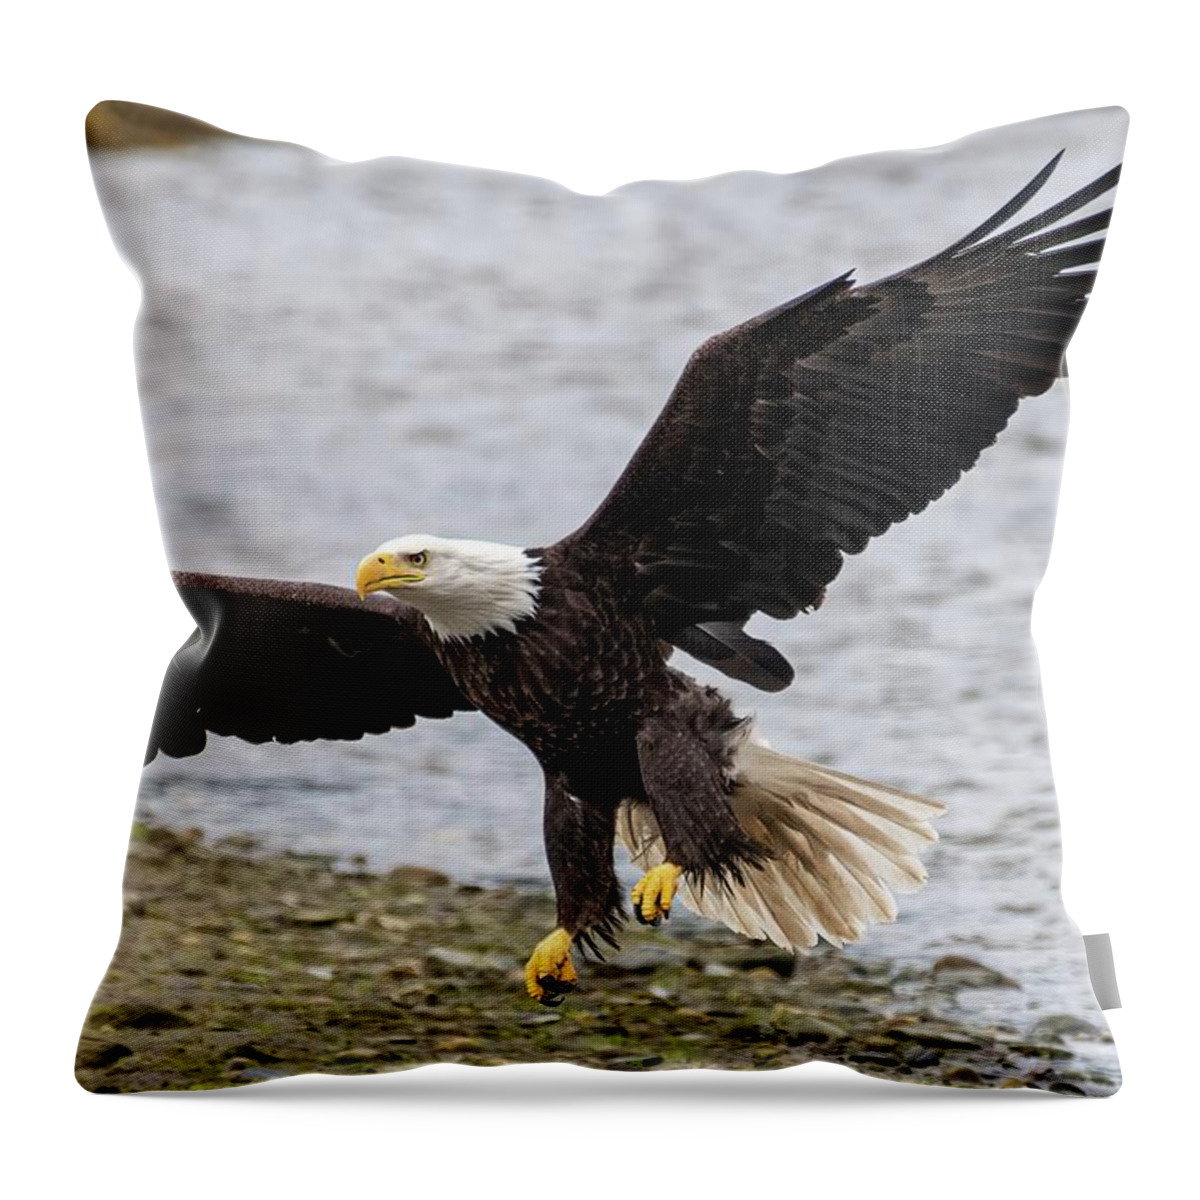 Eagle Throw Pillow featuring the photograph The Spread by David Kirby